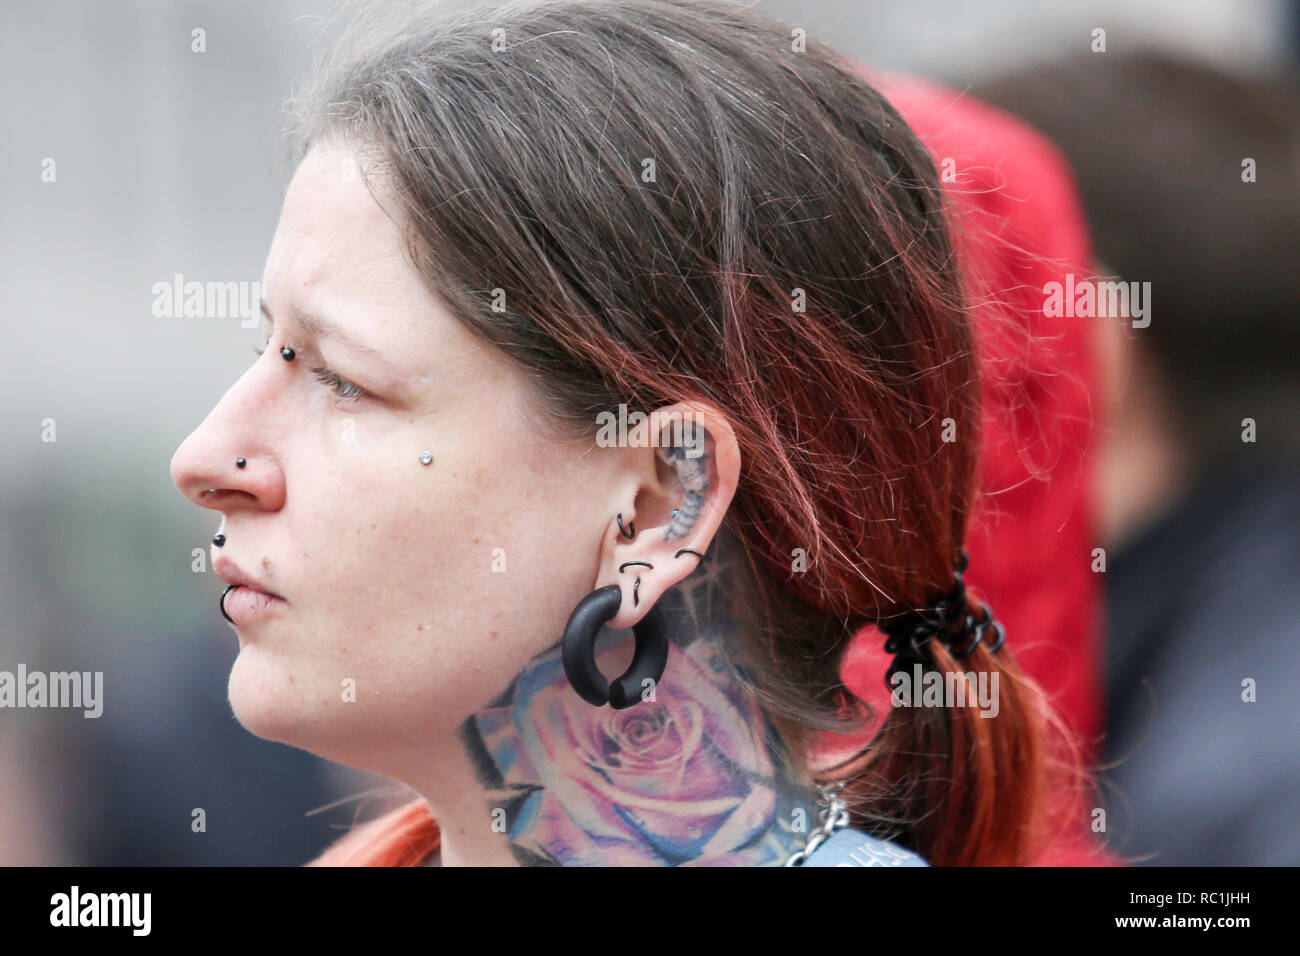 London, UK. 12th Jan, 2019.12th Jan, 20189. A woman at Oxford Circus with ear tattoo. Penelope Barritt/Alamy Live News Stock Photo